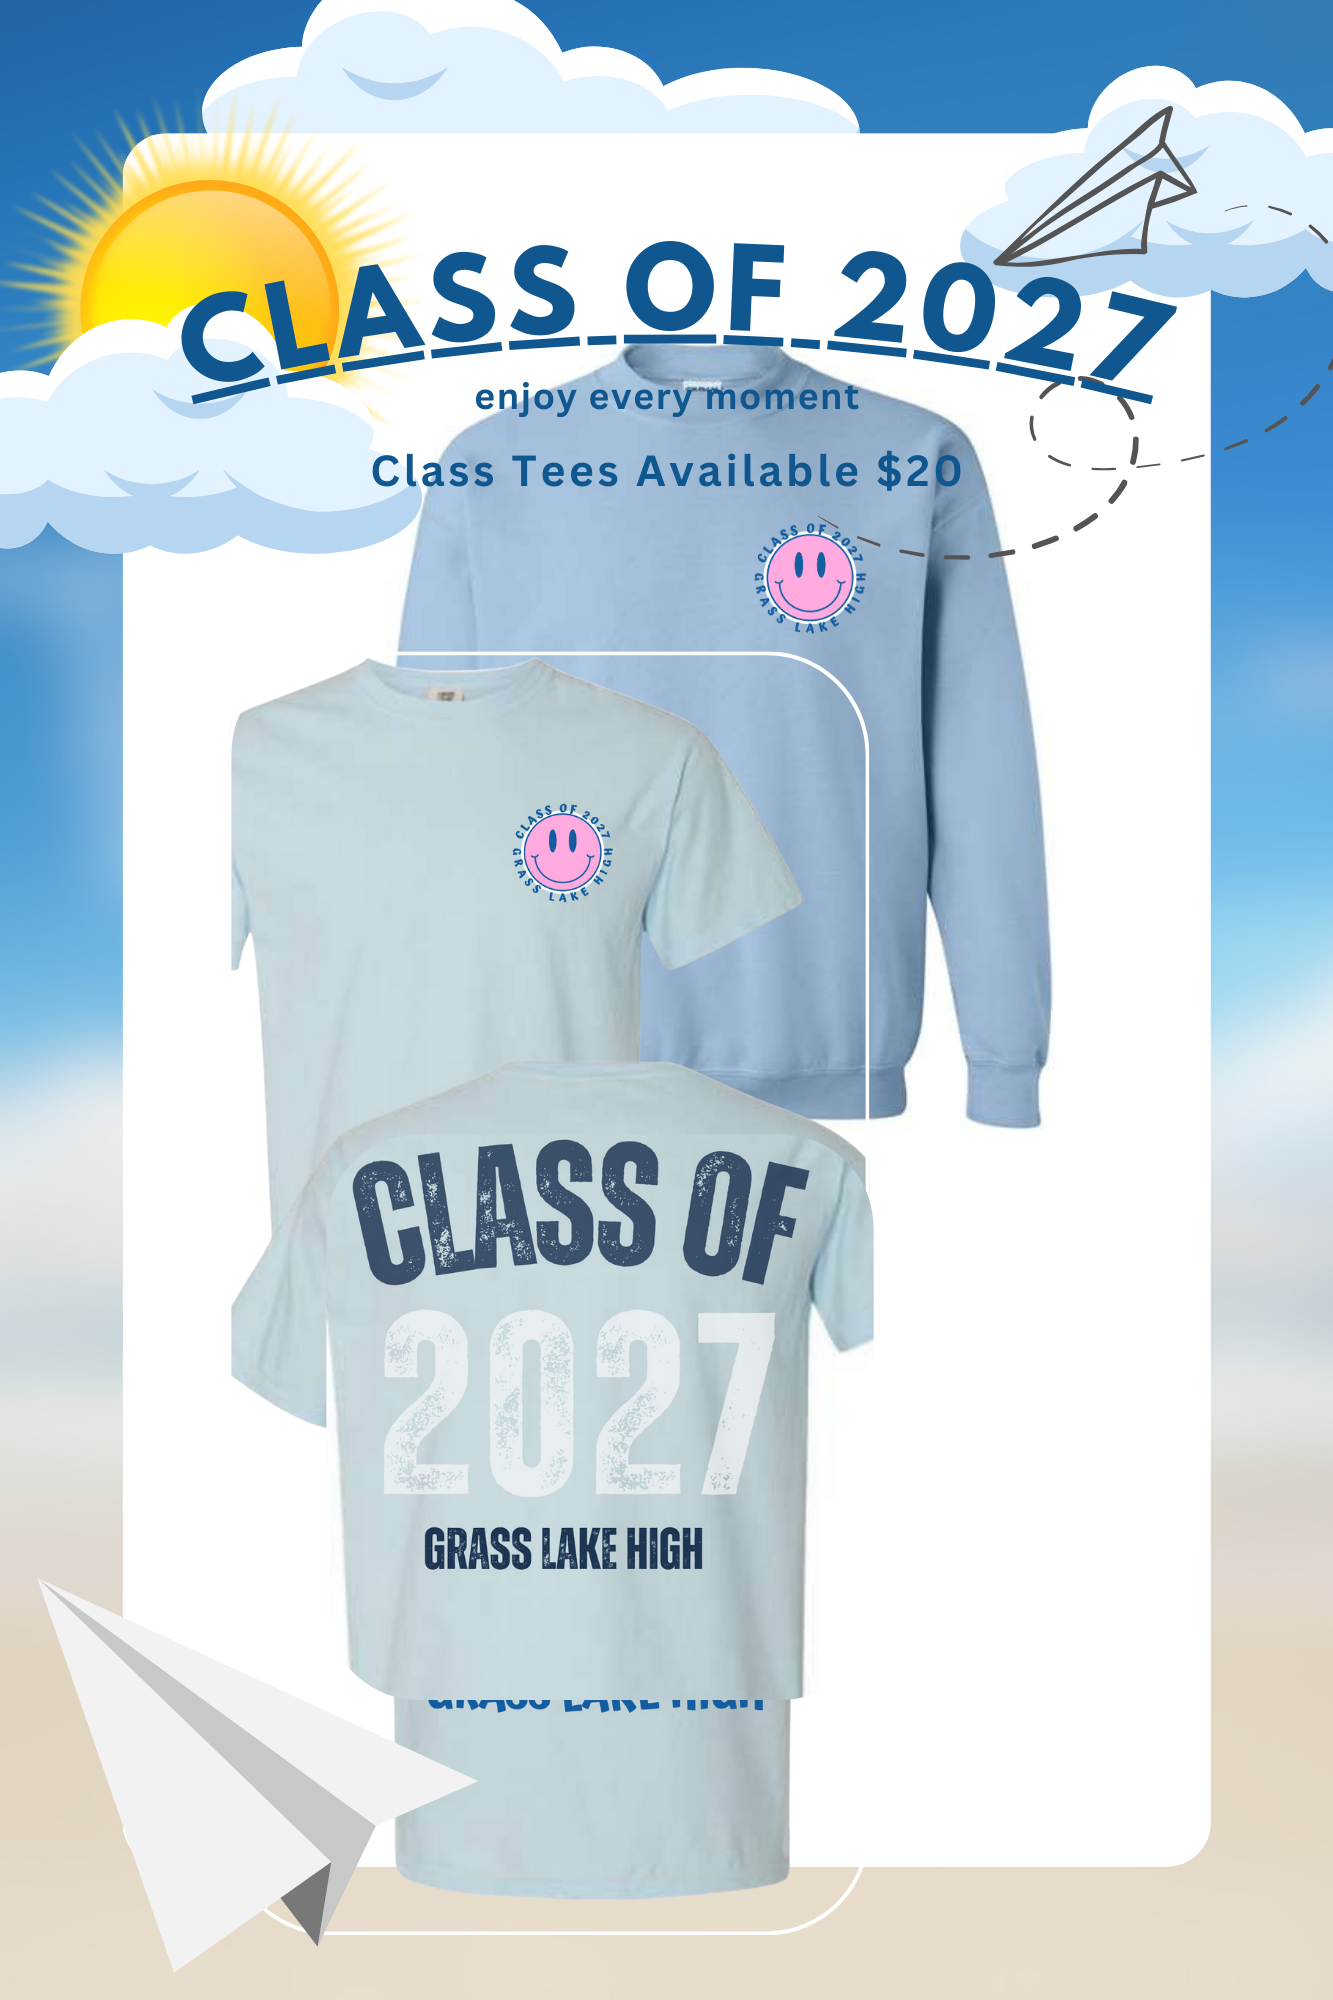 Class of 2027 Tees